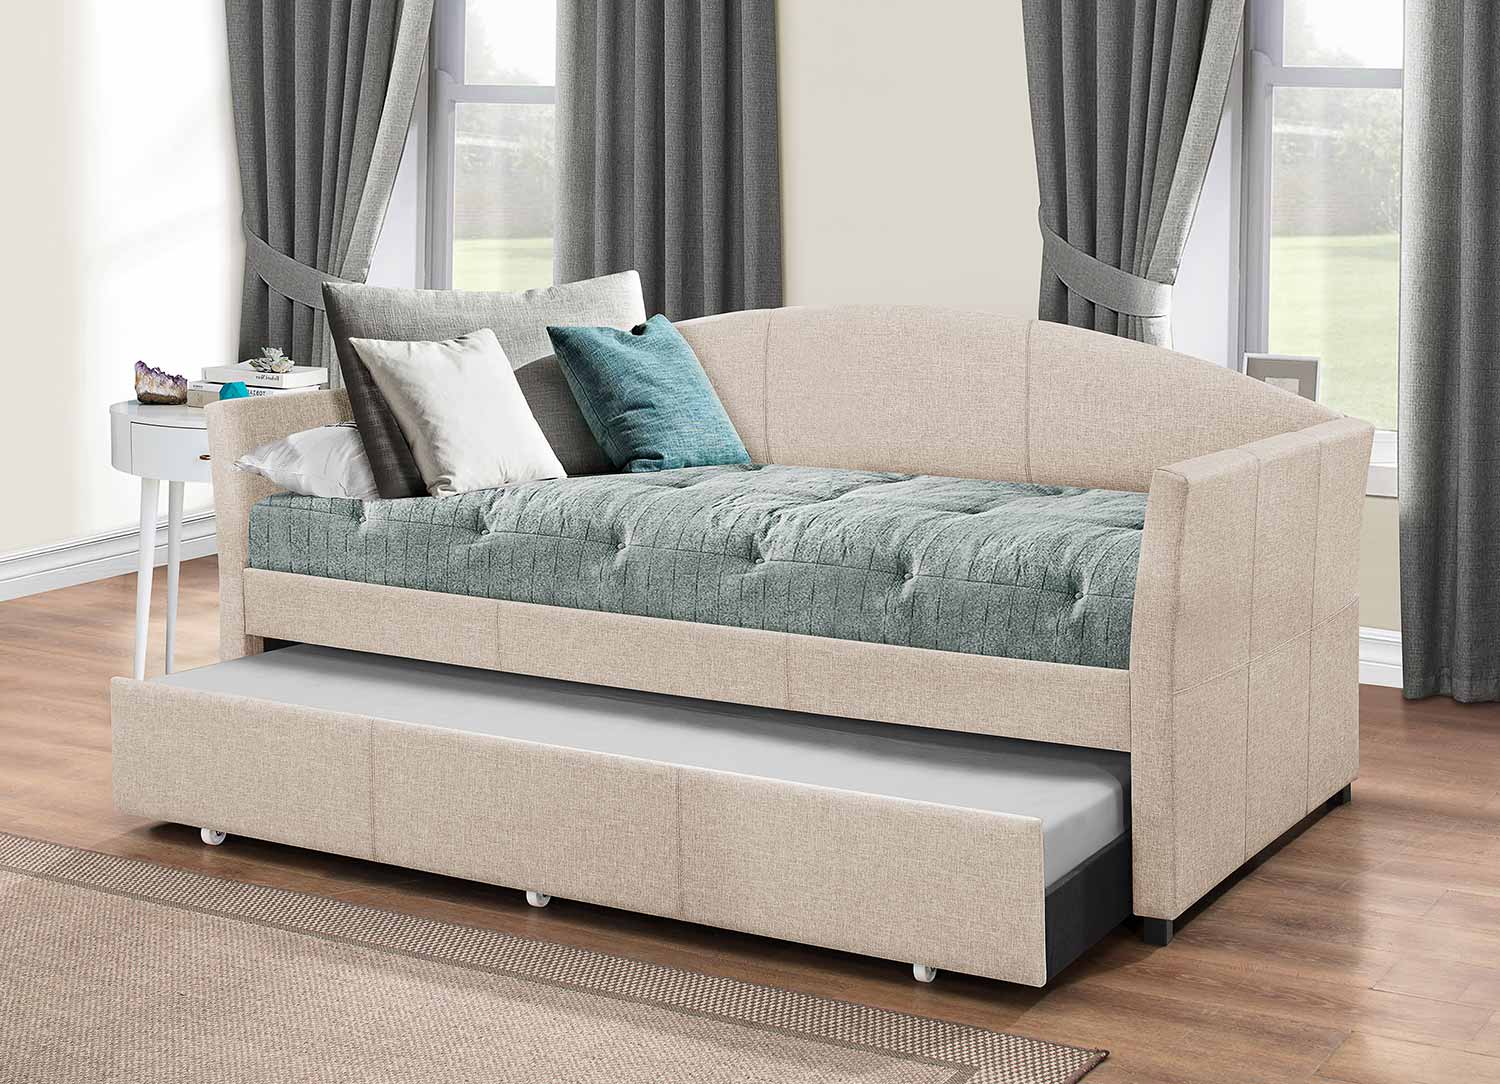 Hillsdale Westchester Daybed with Trundle - Fog Fabric